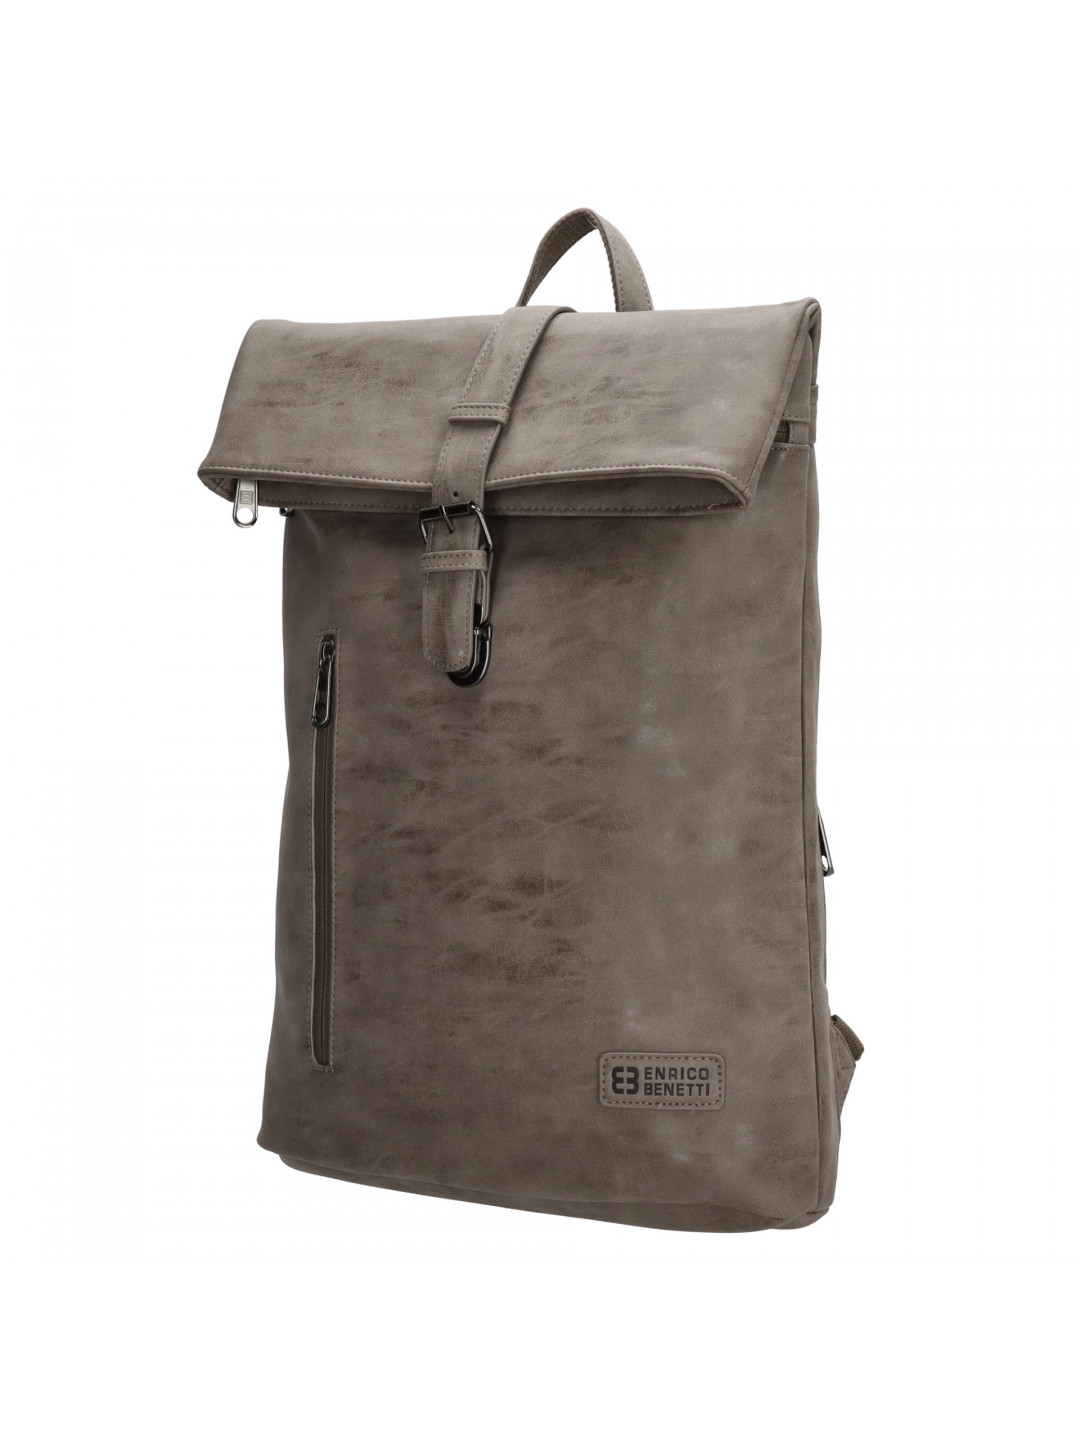 Enrico Benetti Rotterdam 15 quot Notebook Backpack 15 l Medium Taupe